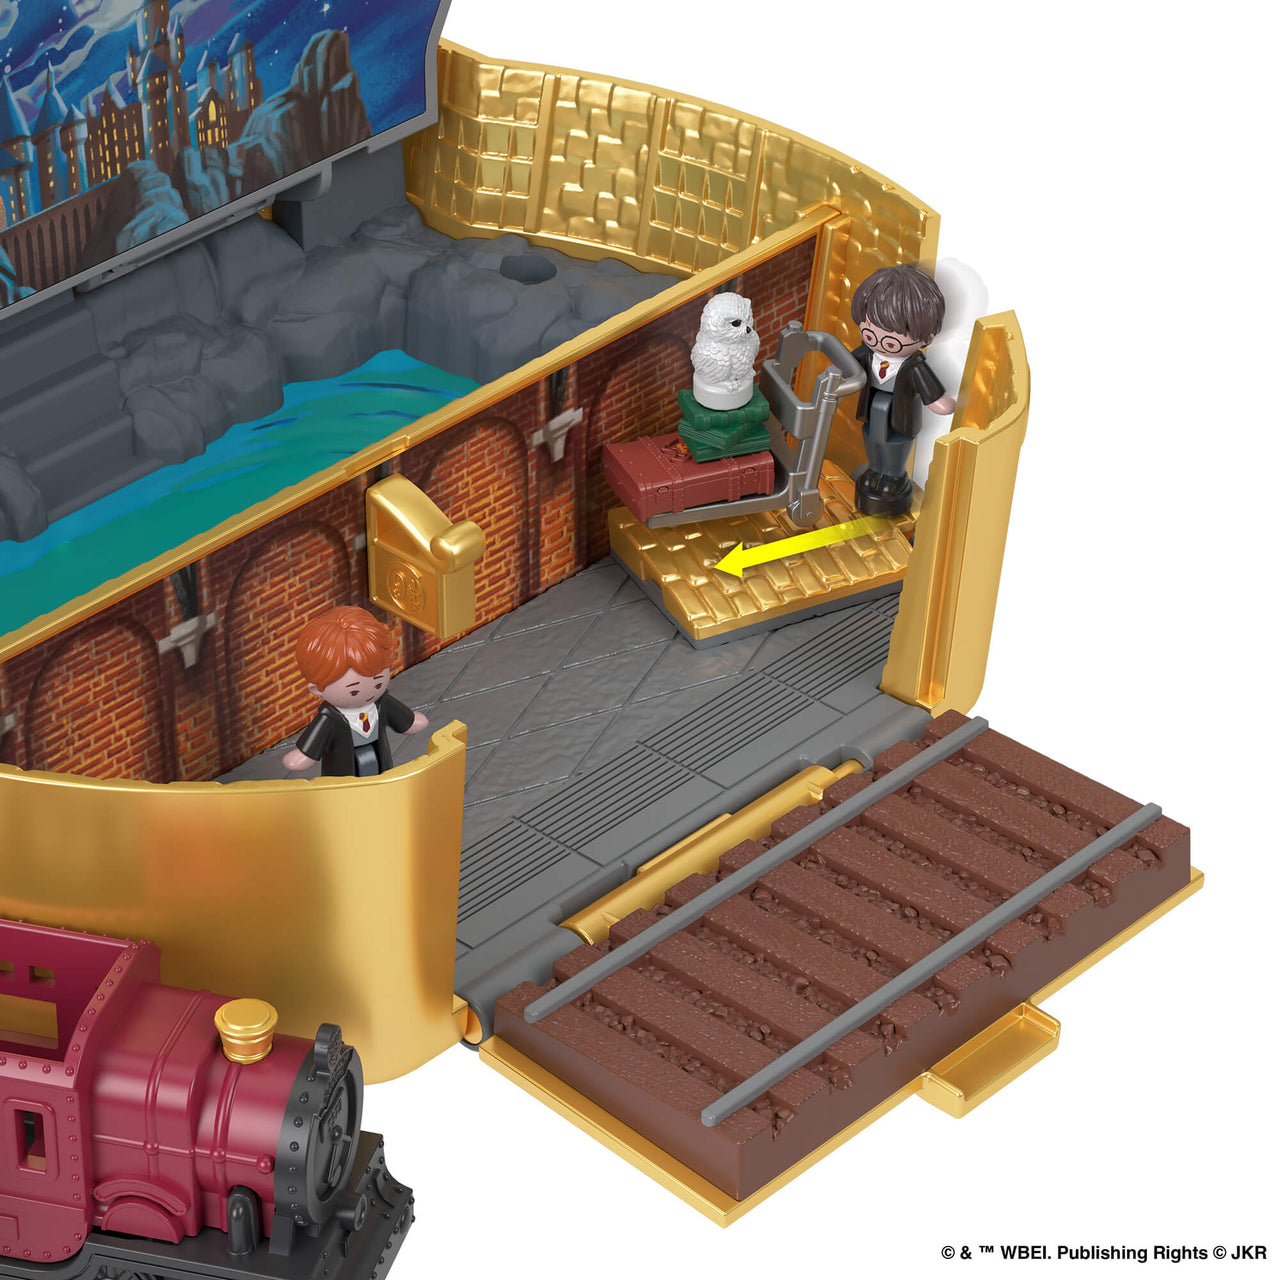 Polly Pocket Harry Potter Collectors Compact Polly Pocket